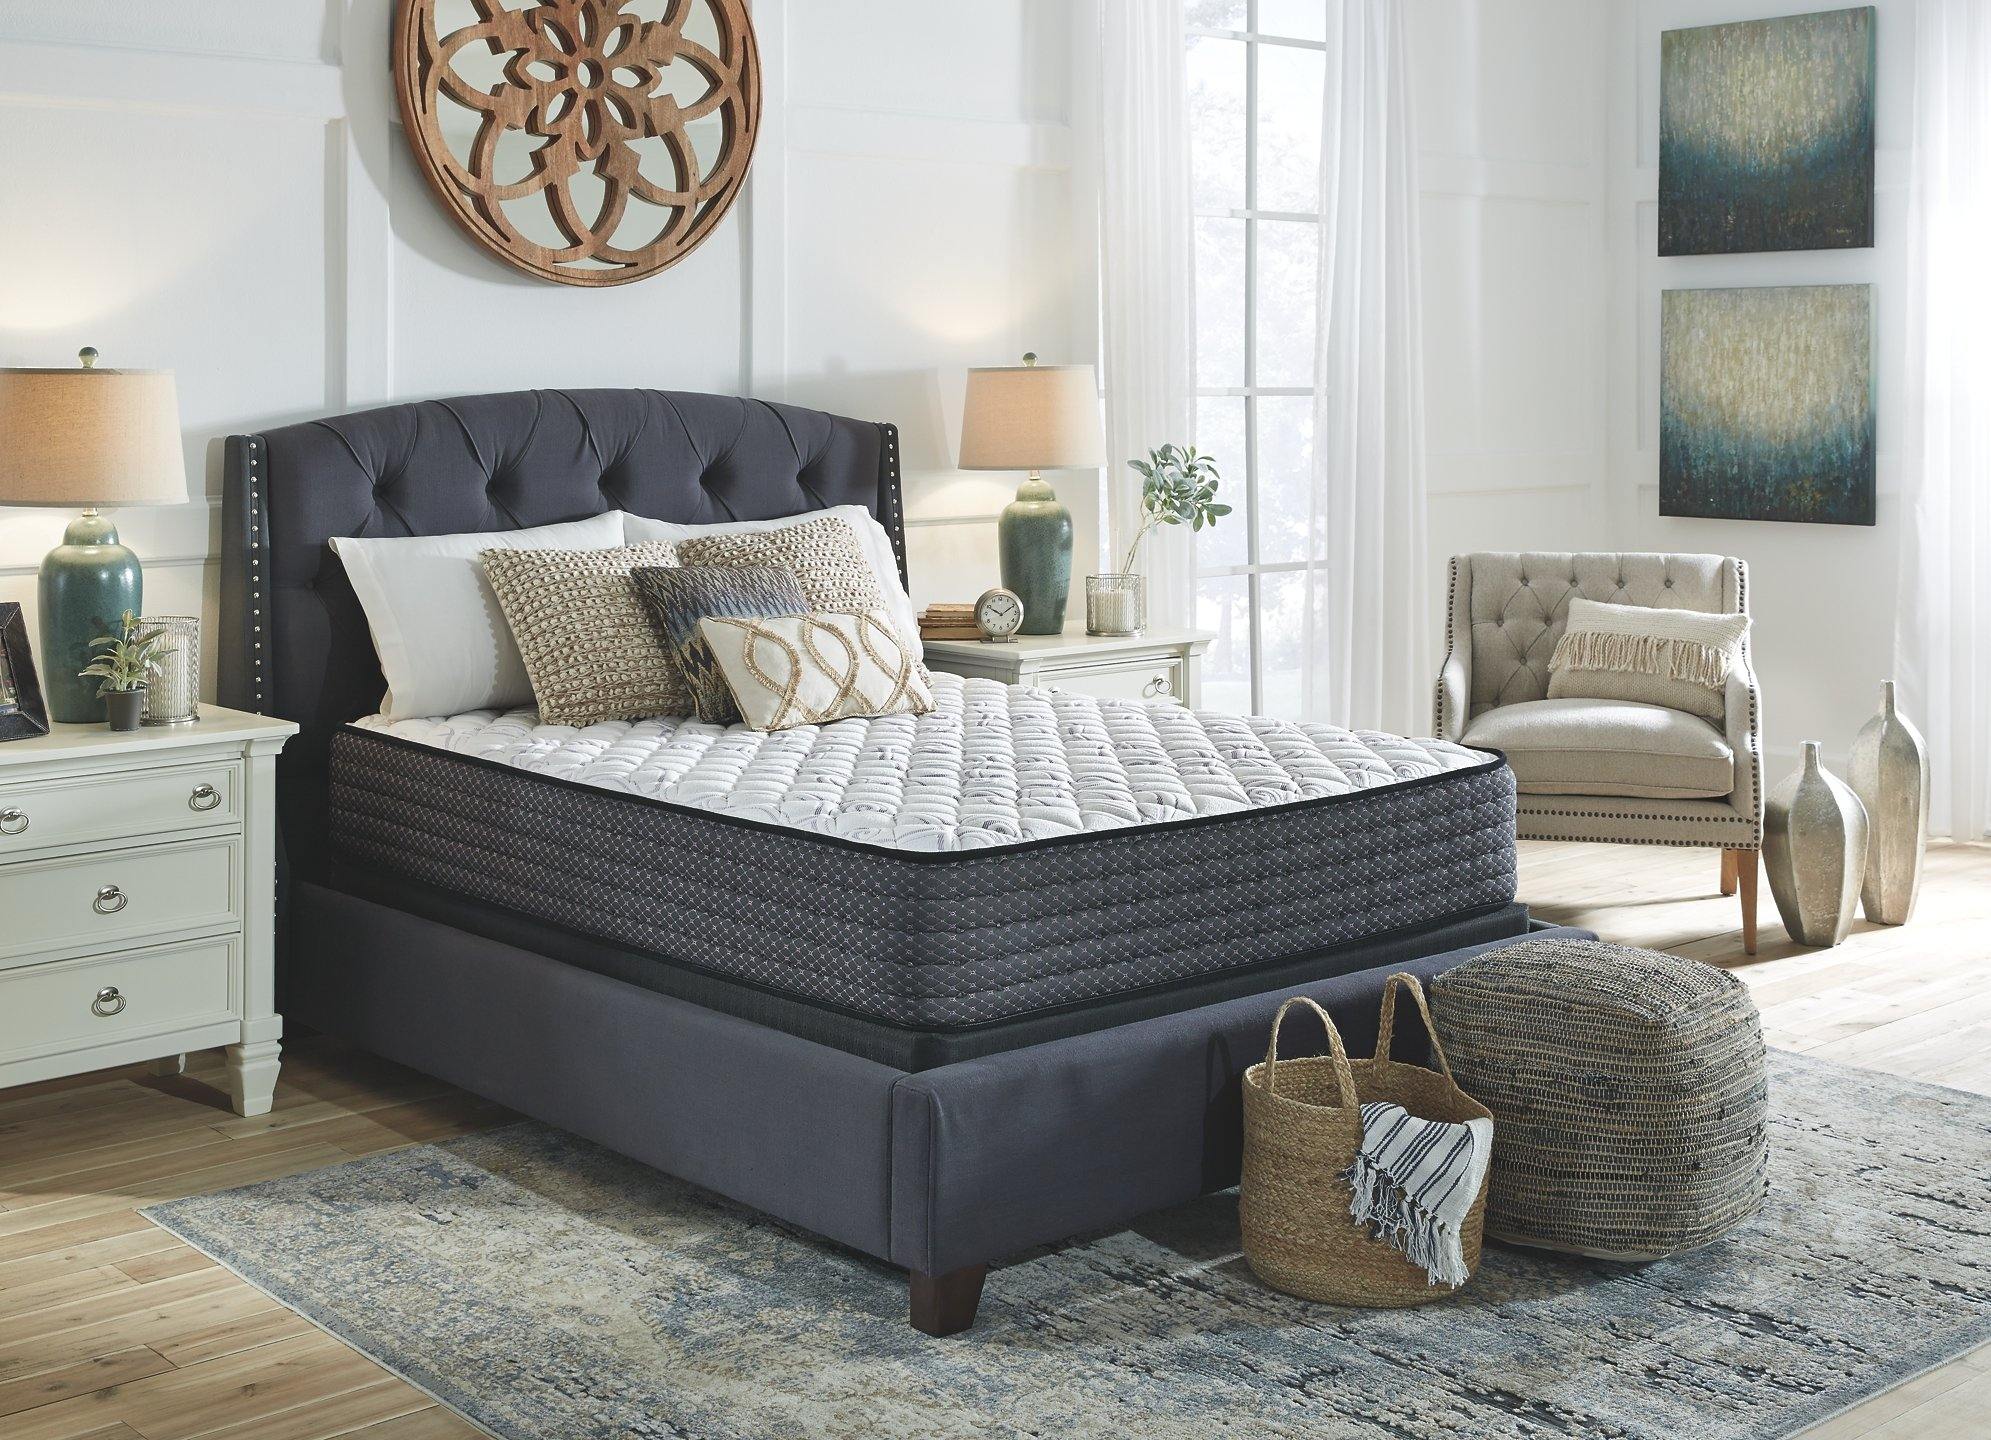 Limited Edition Firm Queen Mattress M62531 Inner Spring Master Mattresses By ashley - sofafair.com